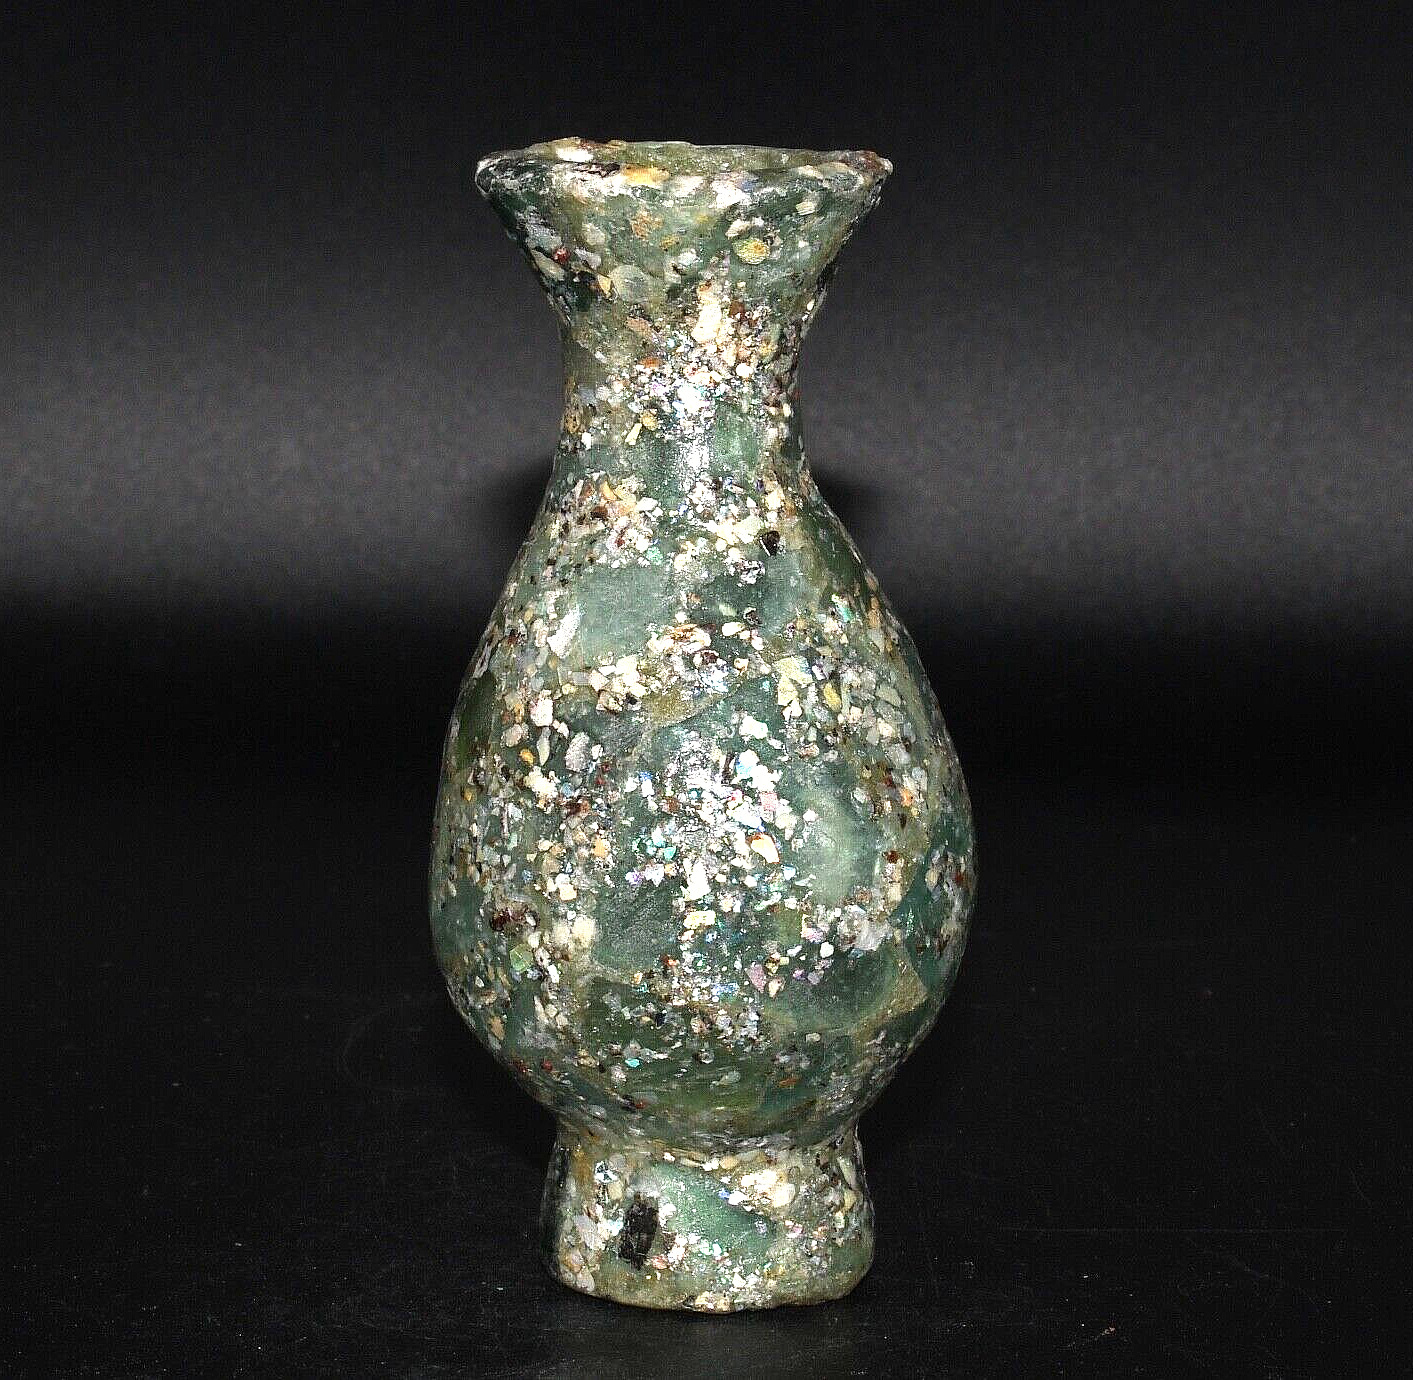 Authentic Ancient Roman Glass Bottle Vessel with Patina Circa 1st-2nd Century AD